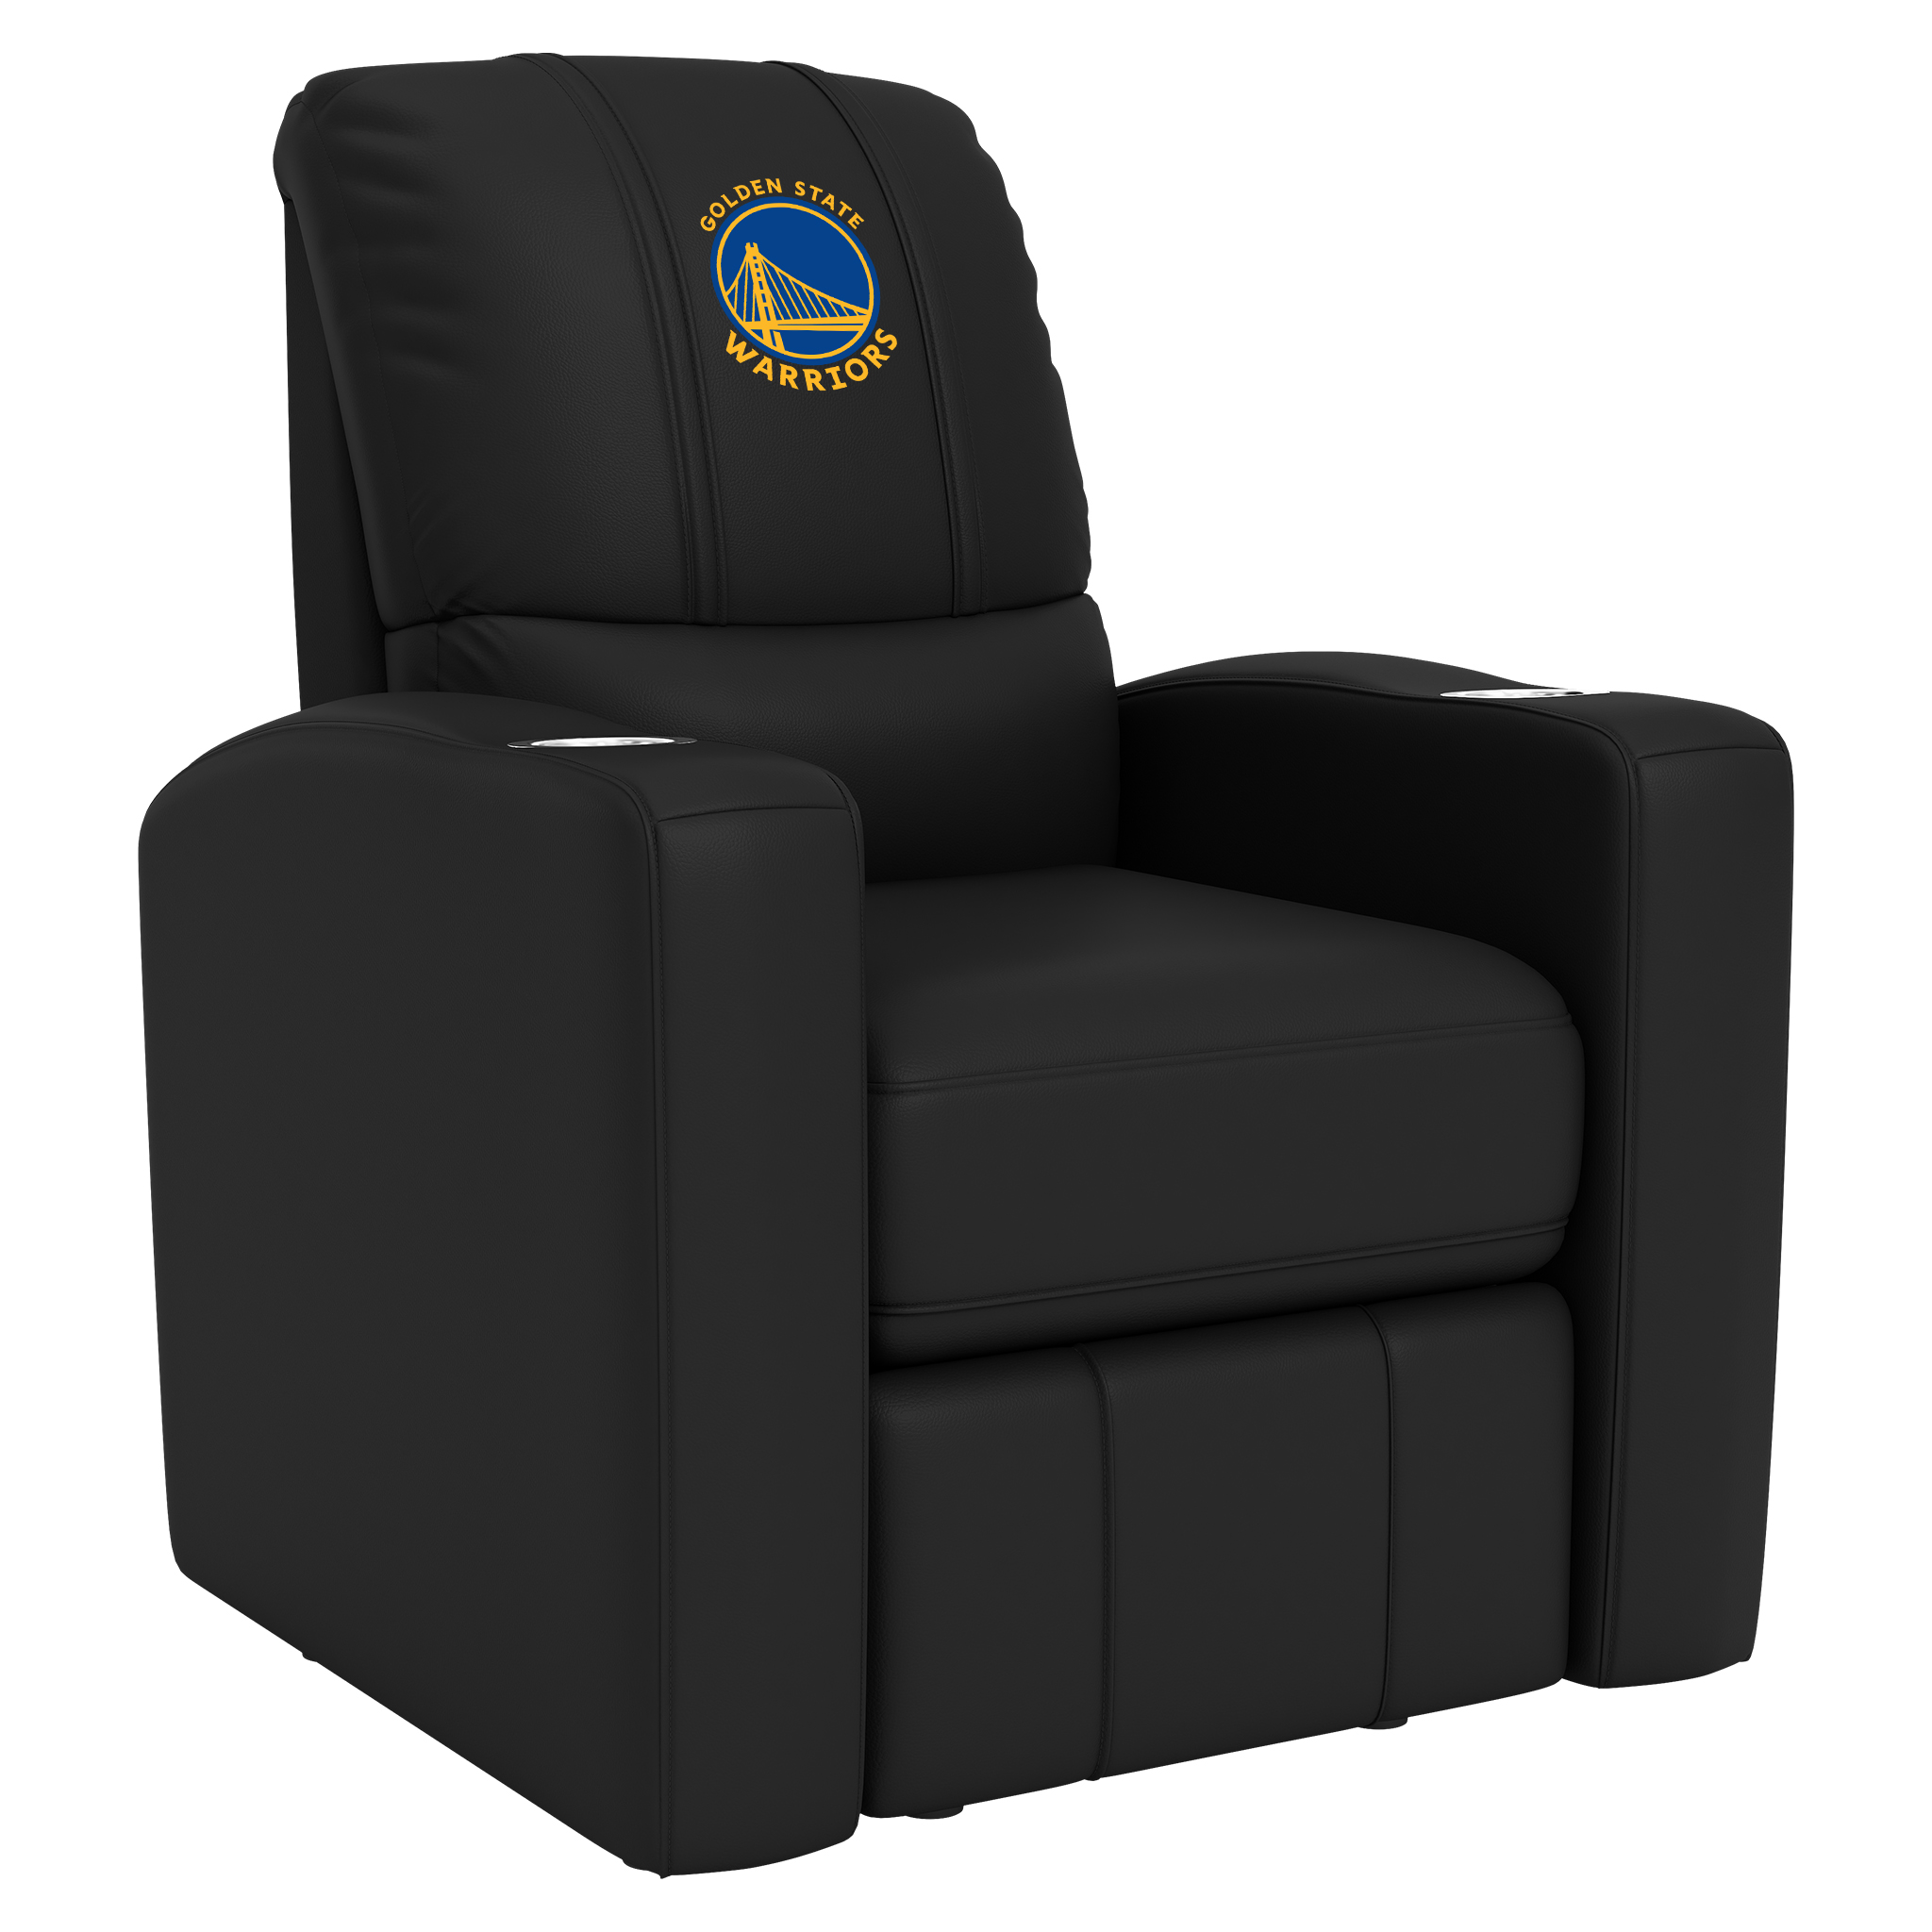 Golden State Warriors Stealth Recliner with Golden State Warriors Global Logo